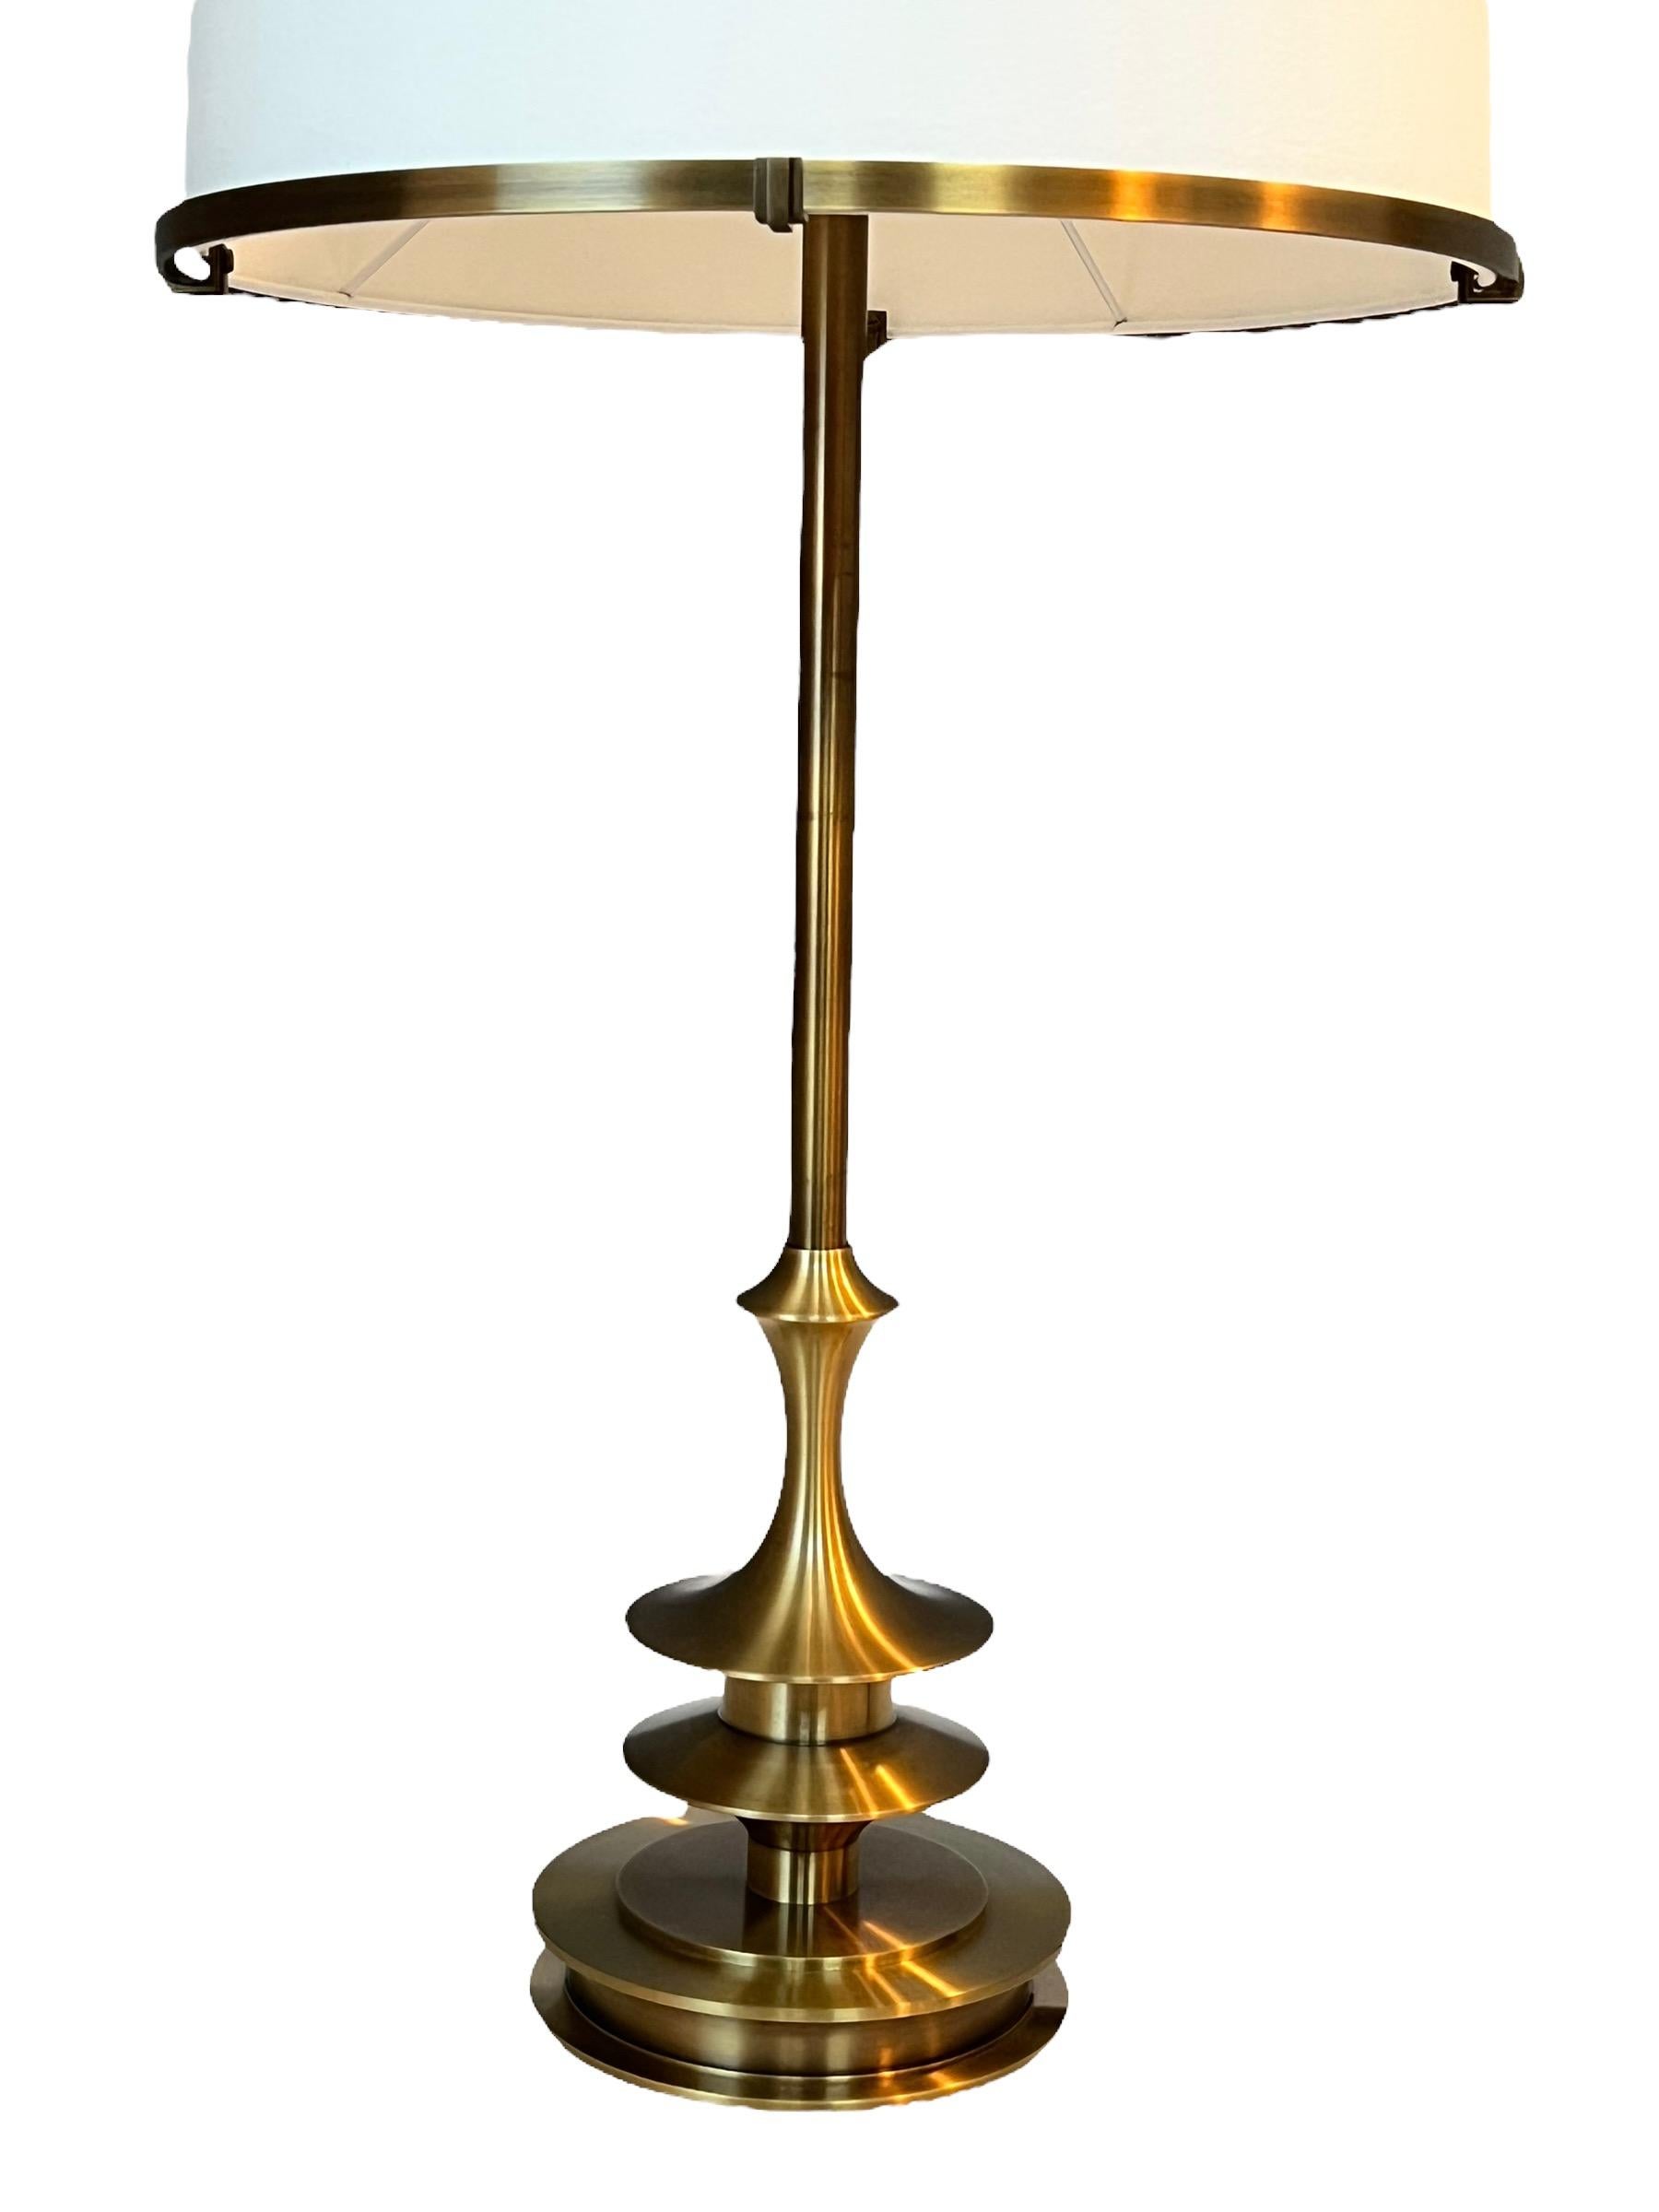 Contemporary Pair of Side Table Lamps, Solid Brass by Designer Solis Betancourt 1